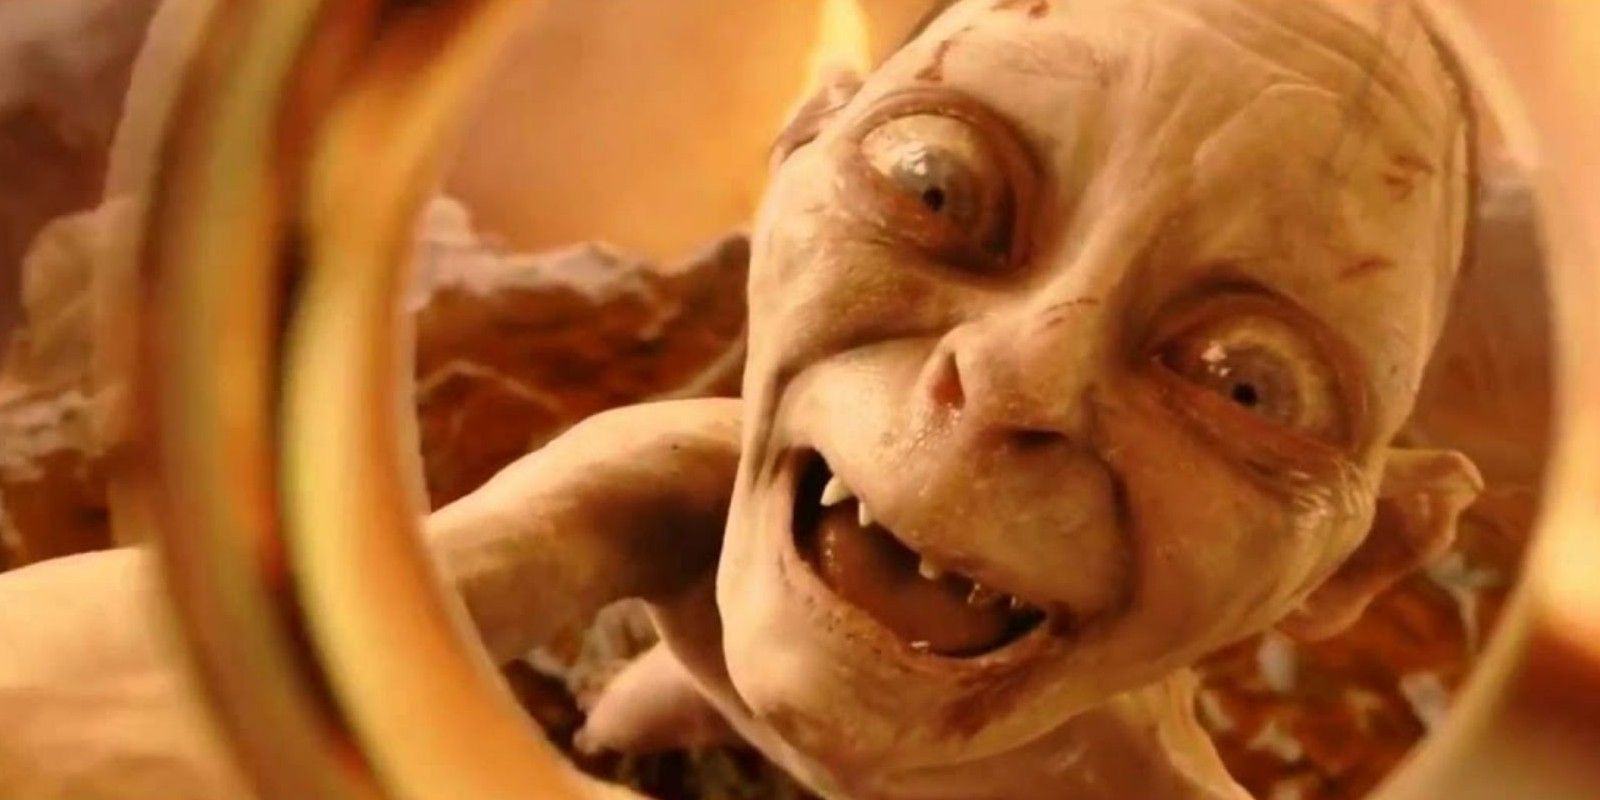 Gollum holding the Ring in The Lord of the Rings.